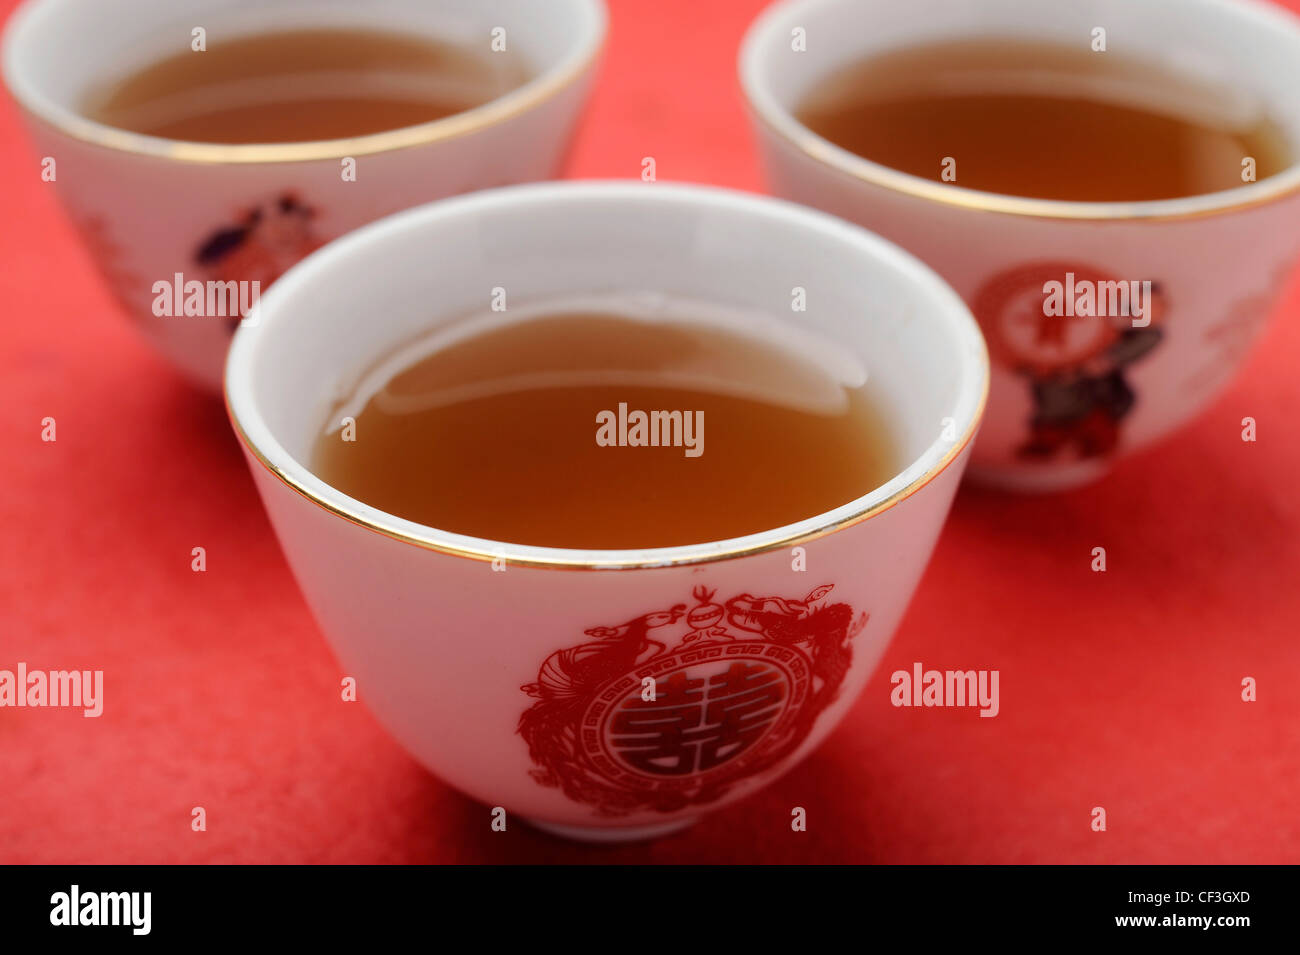 Three small chinese style patterned cups filled with green tea Stock Photo